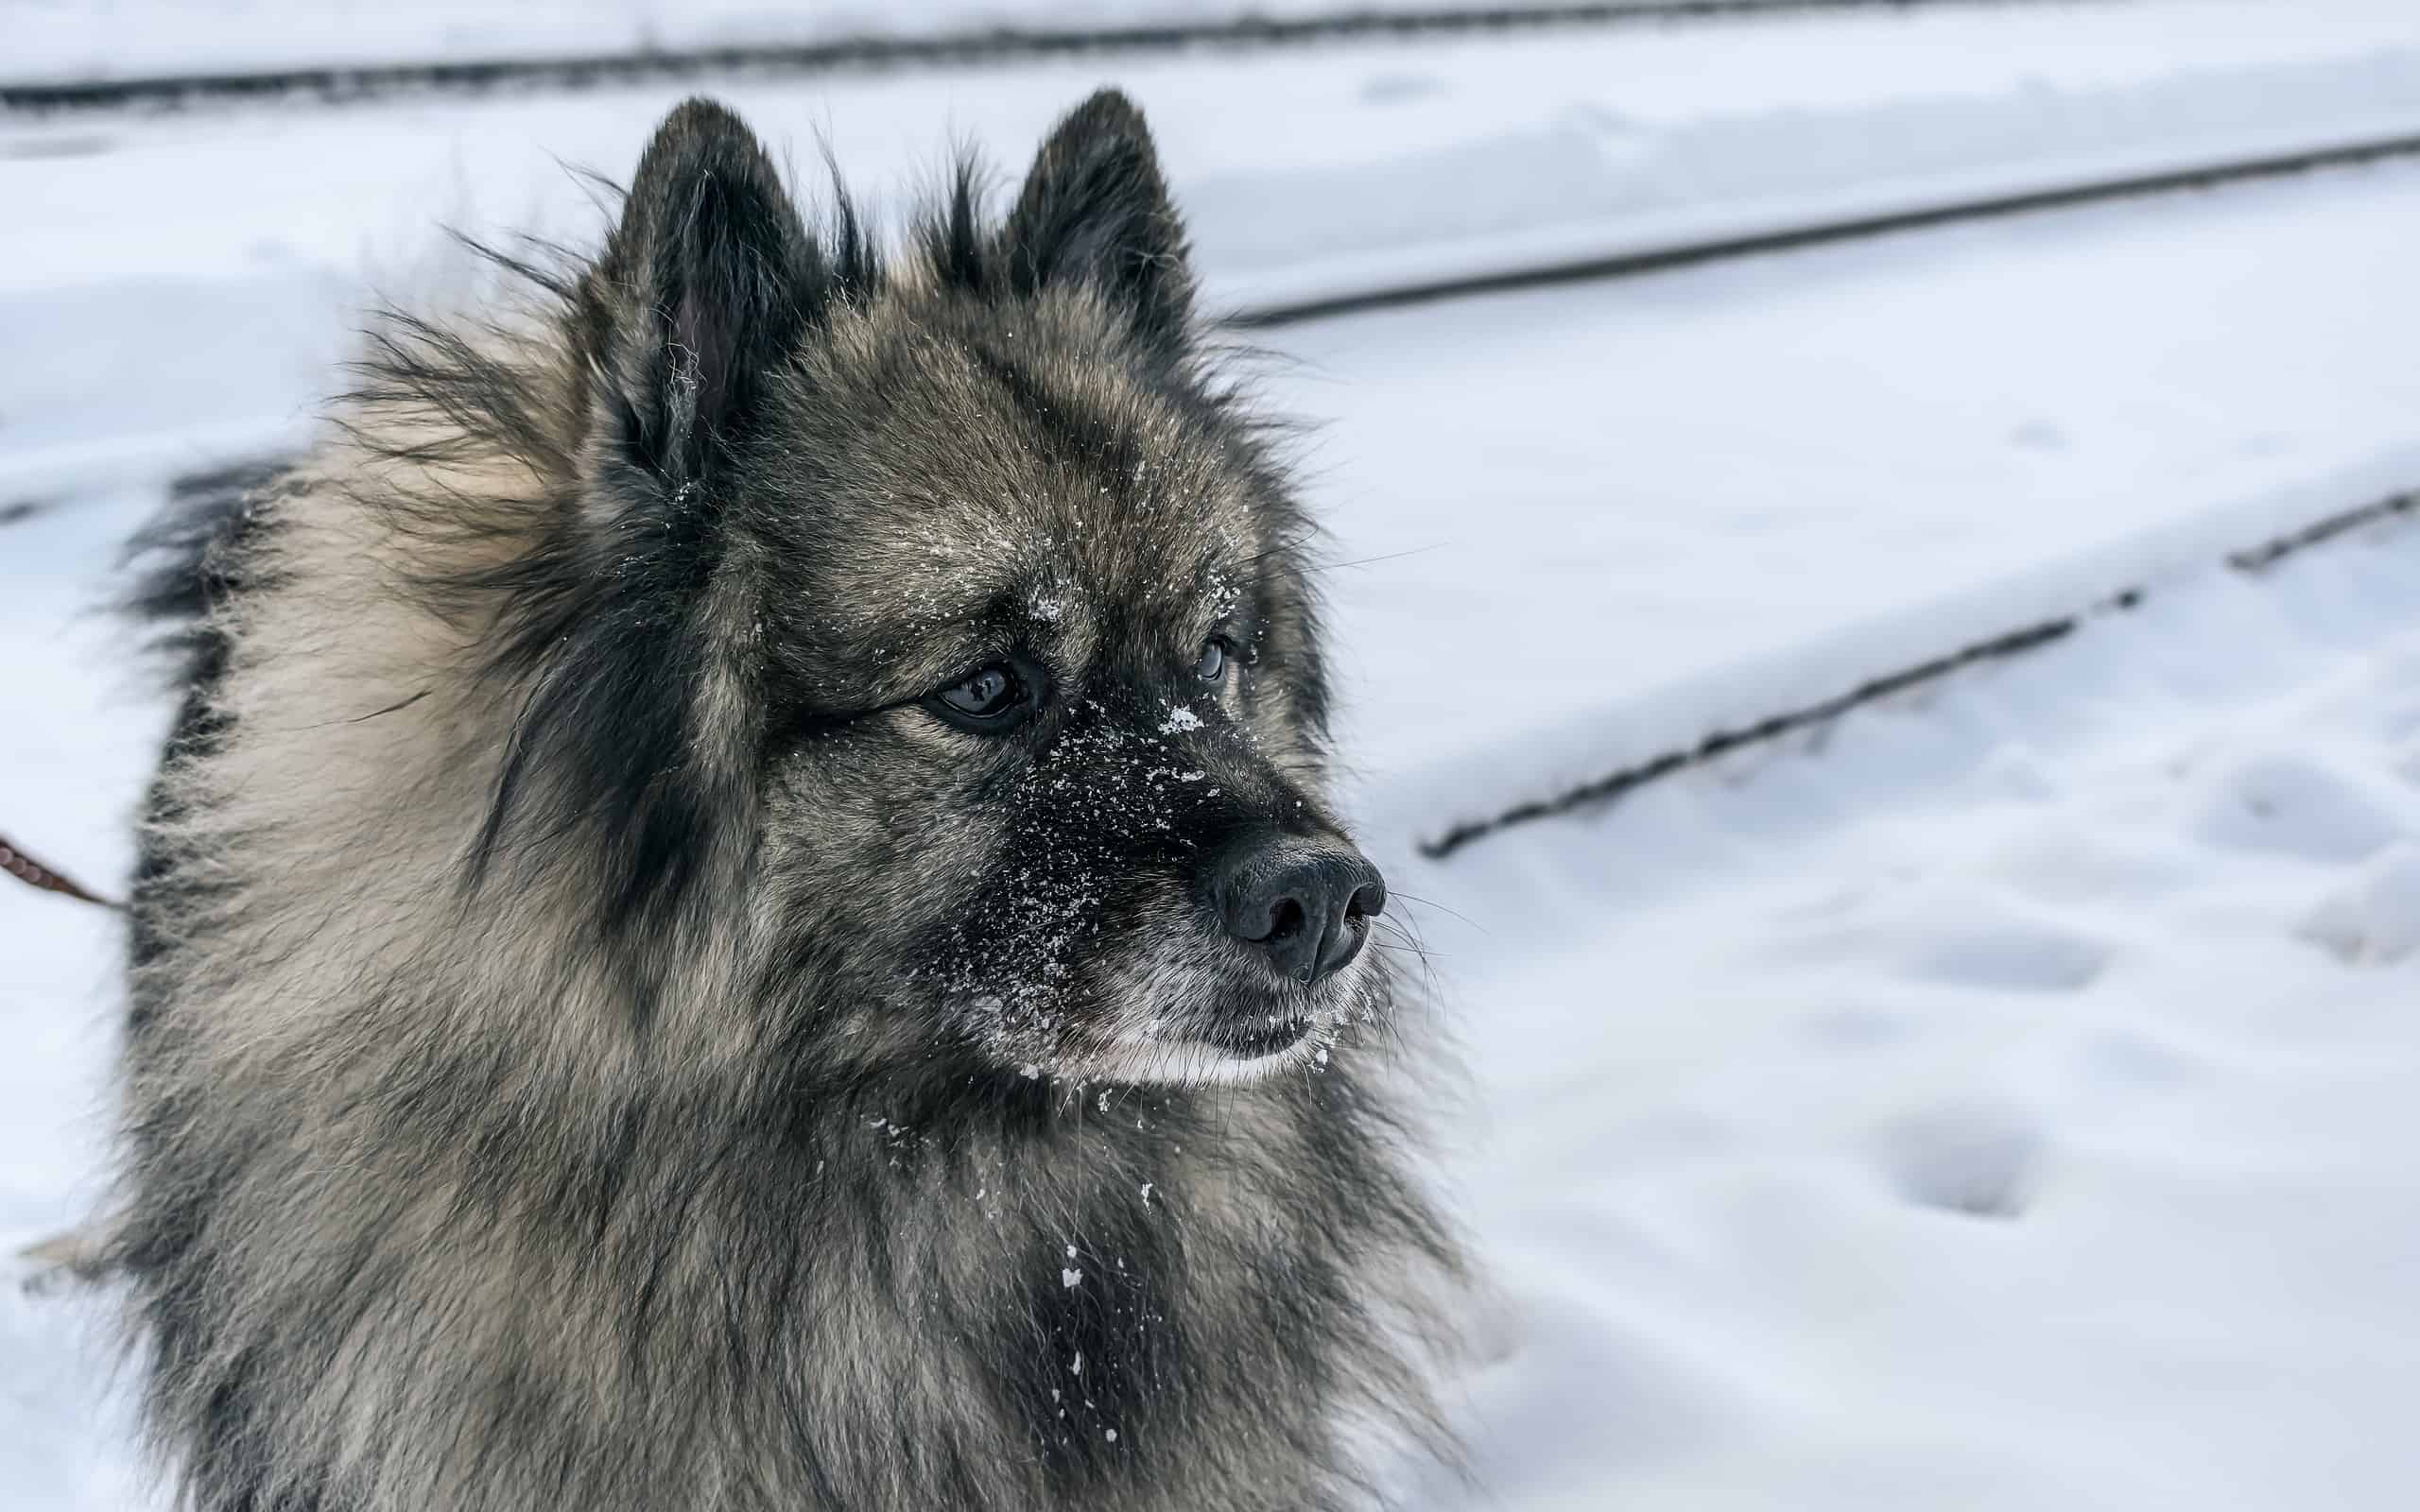 Fluffy Keeshond dog walking in the snow in winter